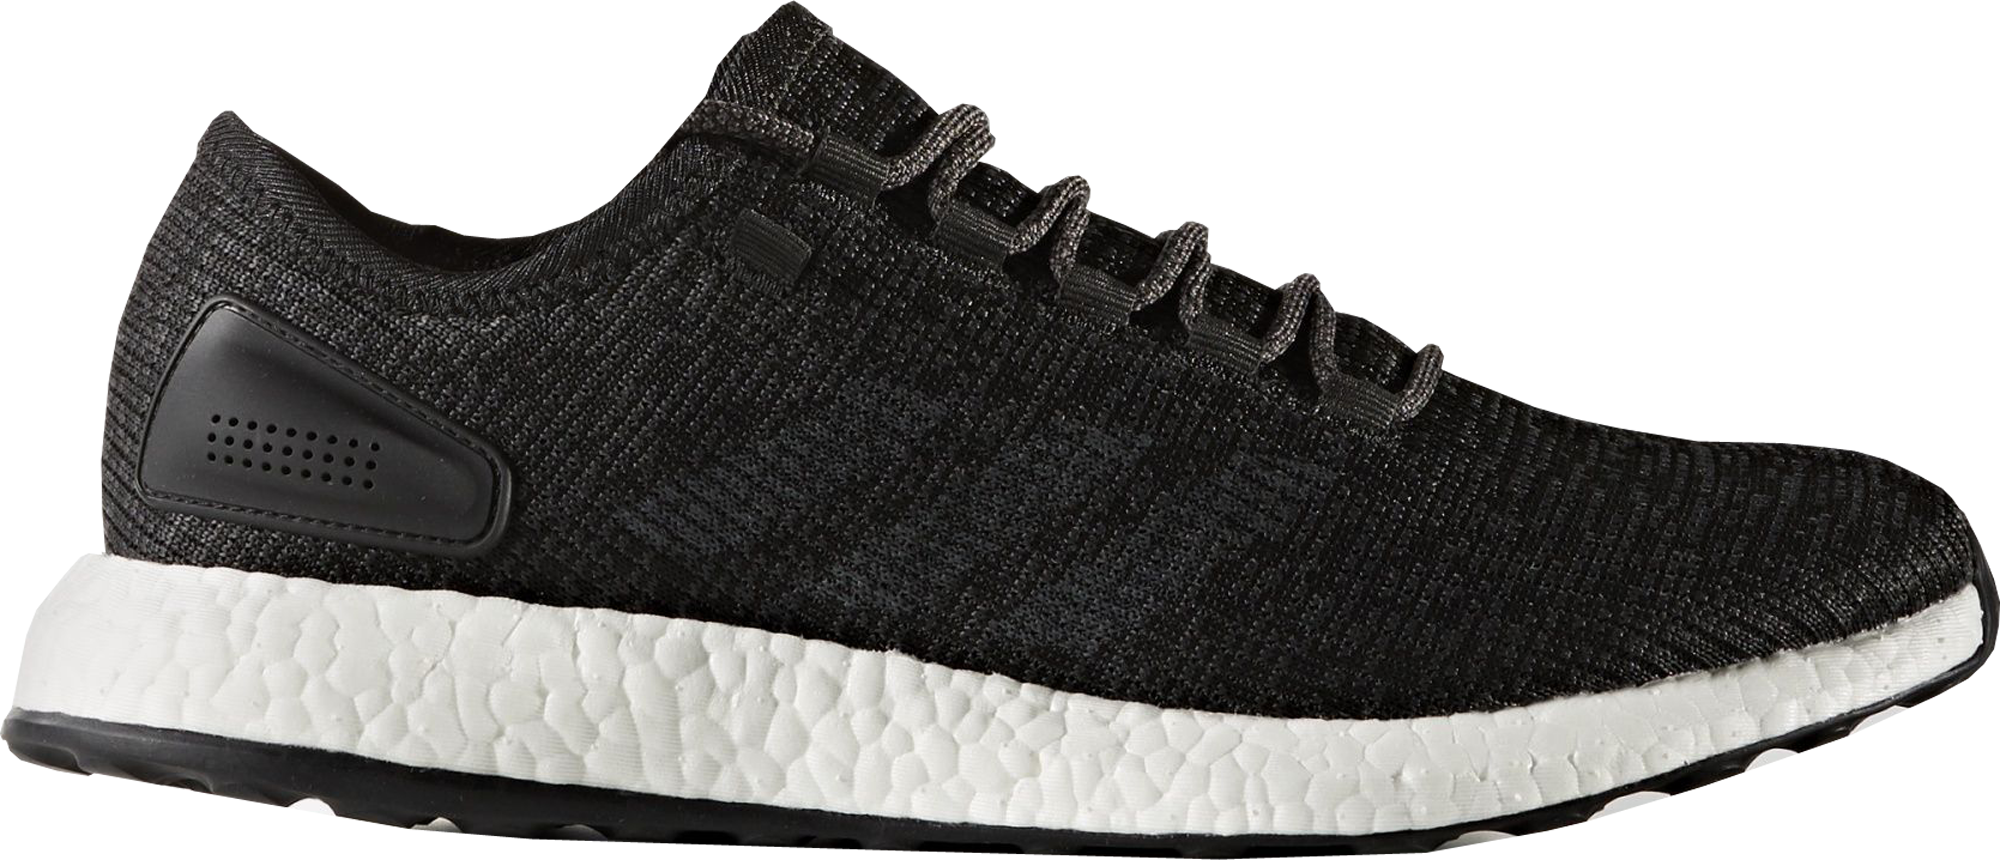 pure boost shoes black